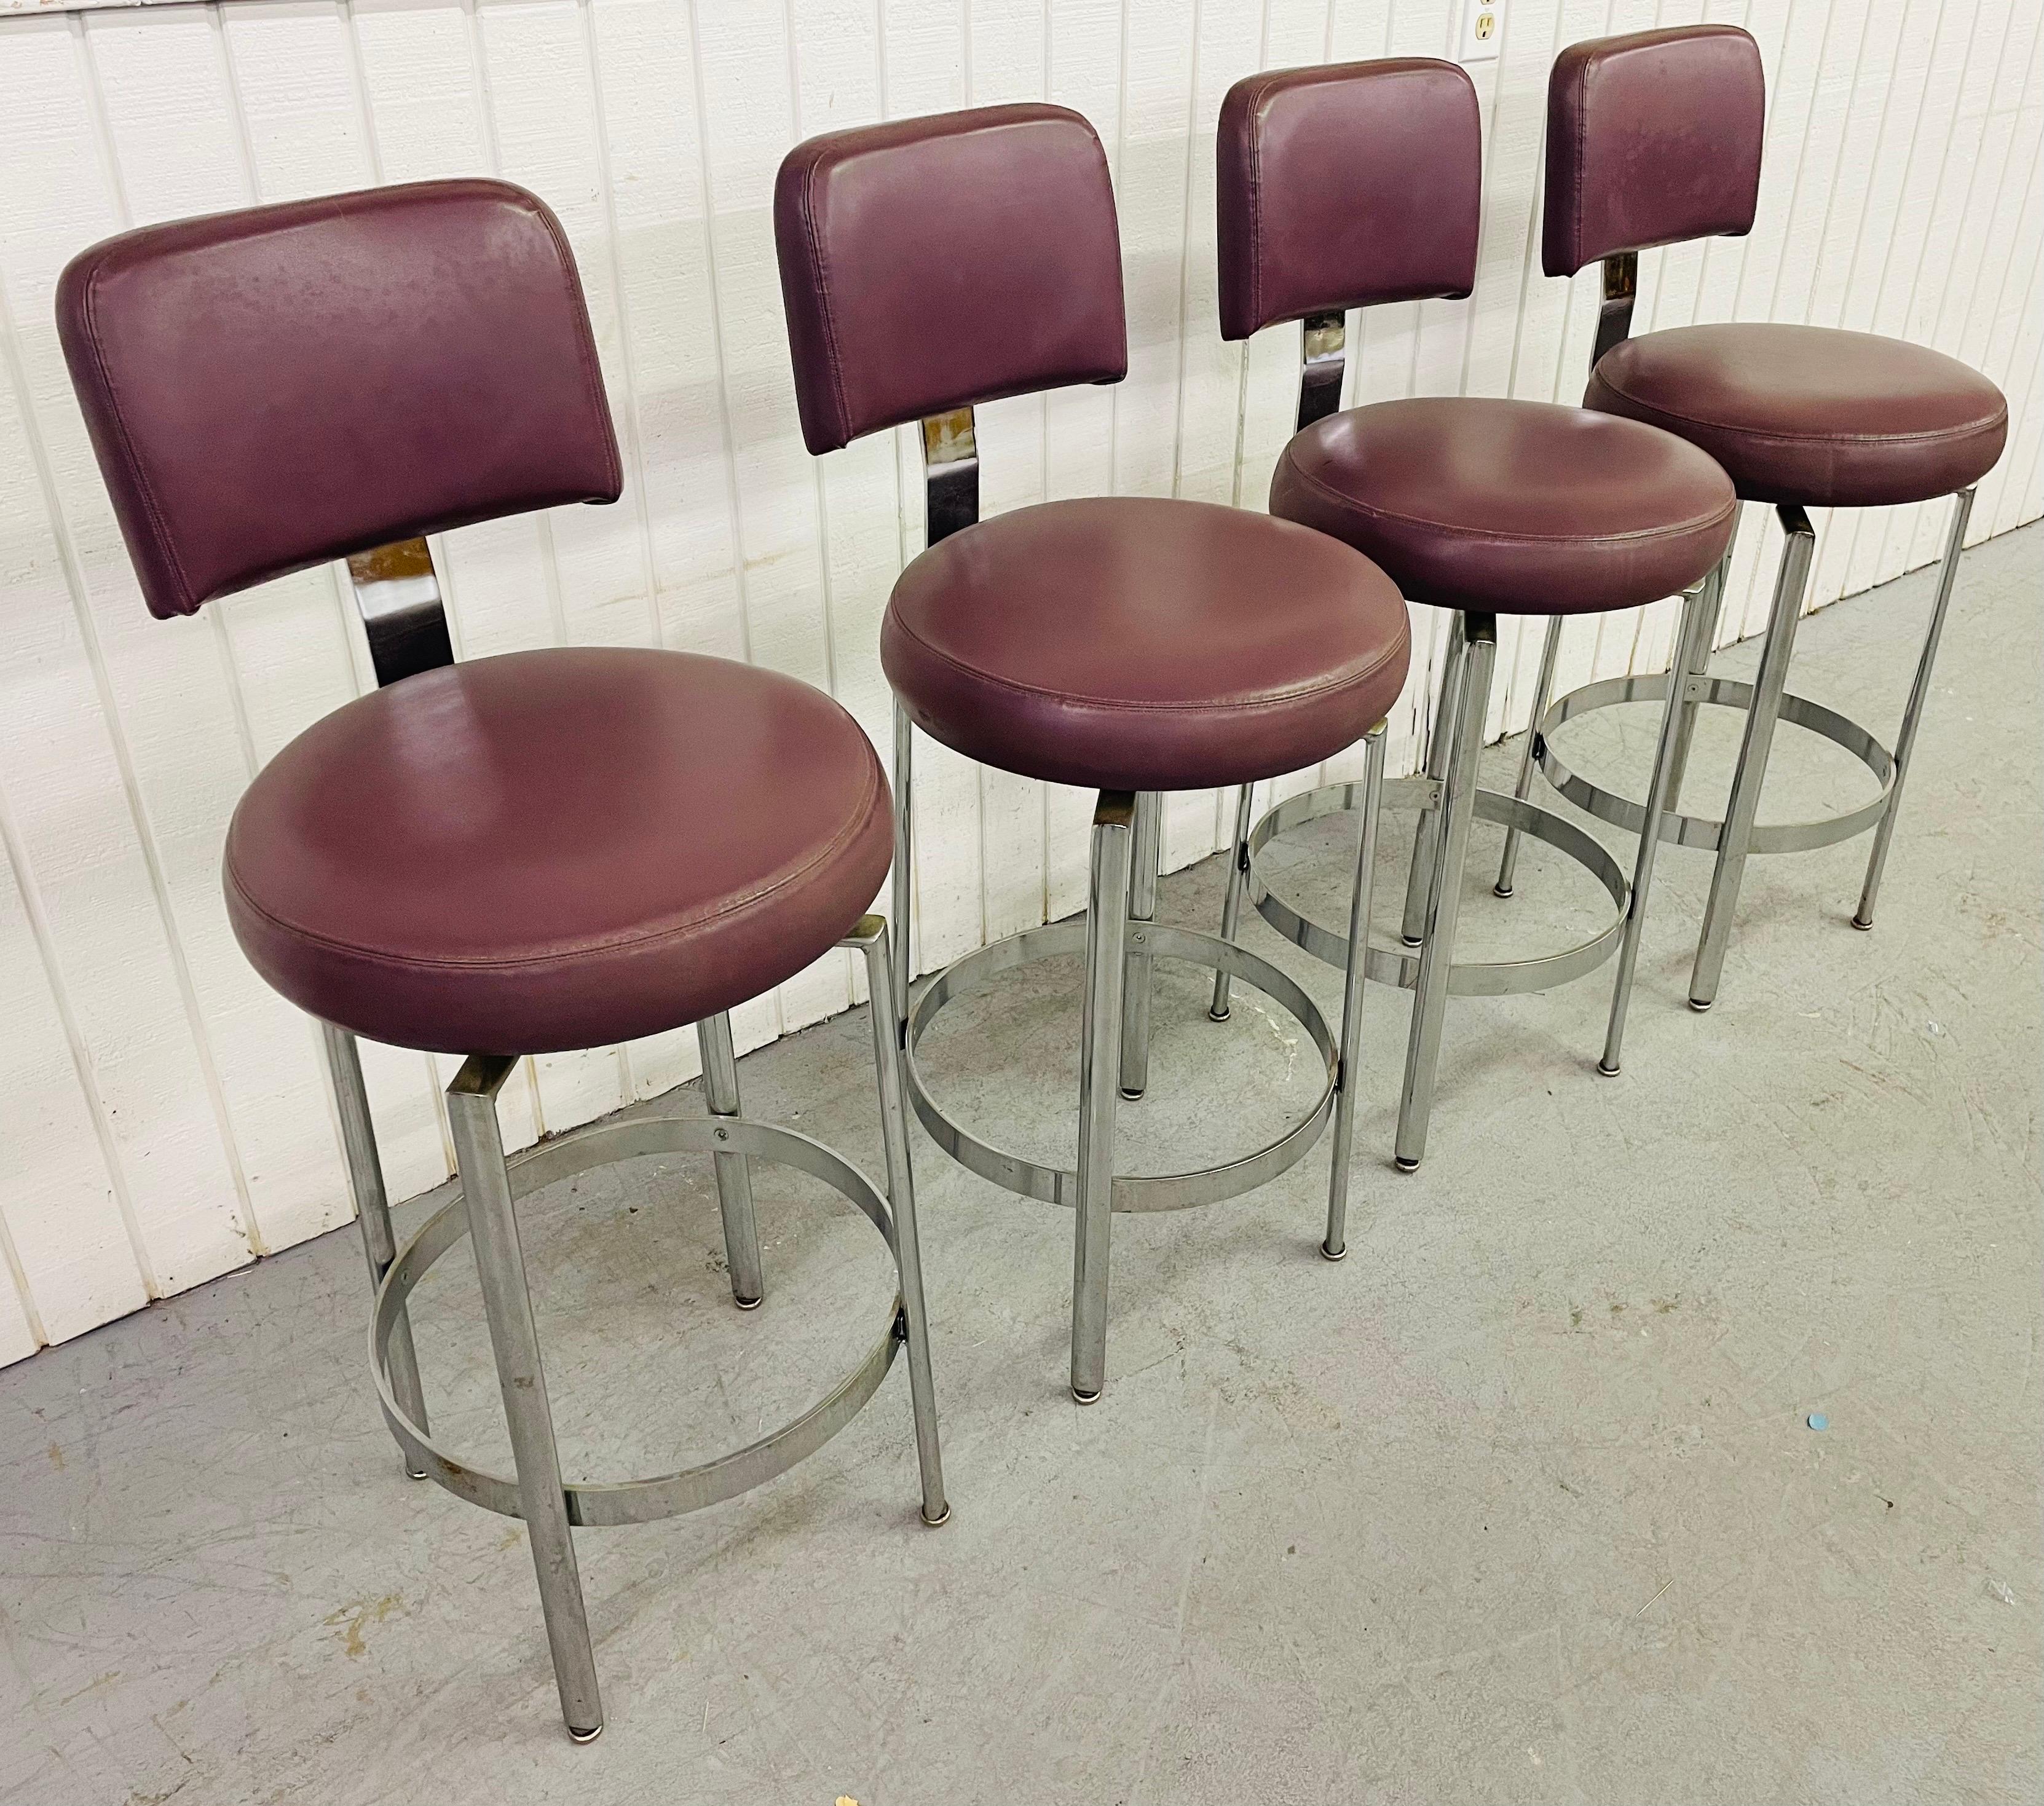 This listing is for a set of four Vintage Milo Baughman Style Bar Stools. Featuring purple leather upholstery, swivel seats, and chrome legs.